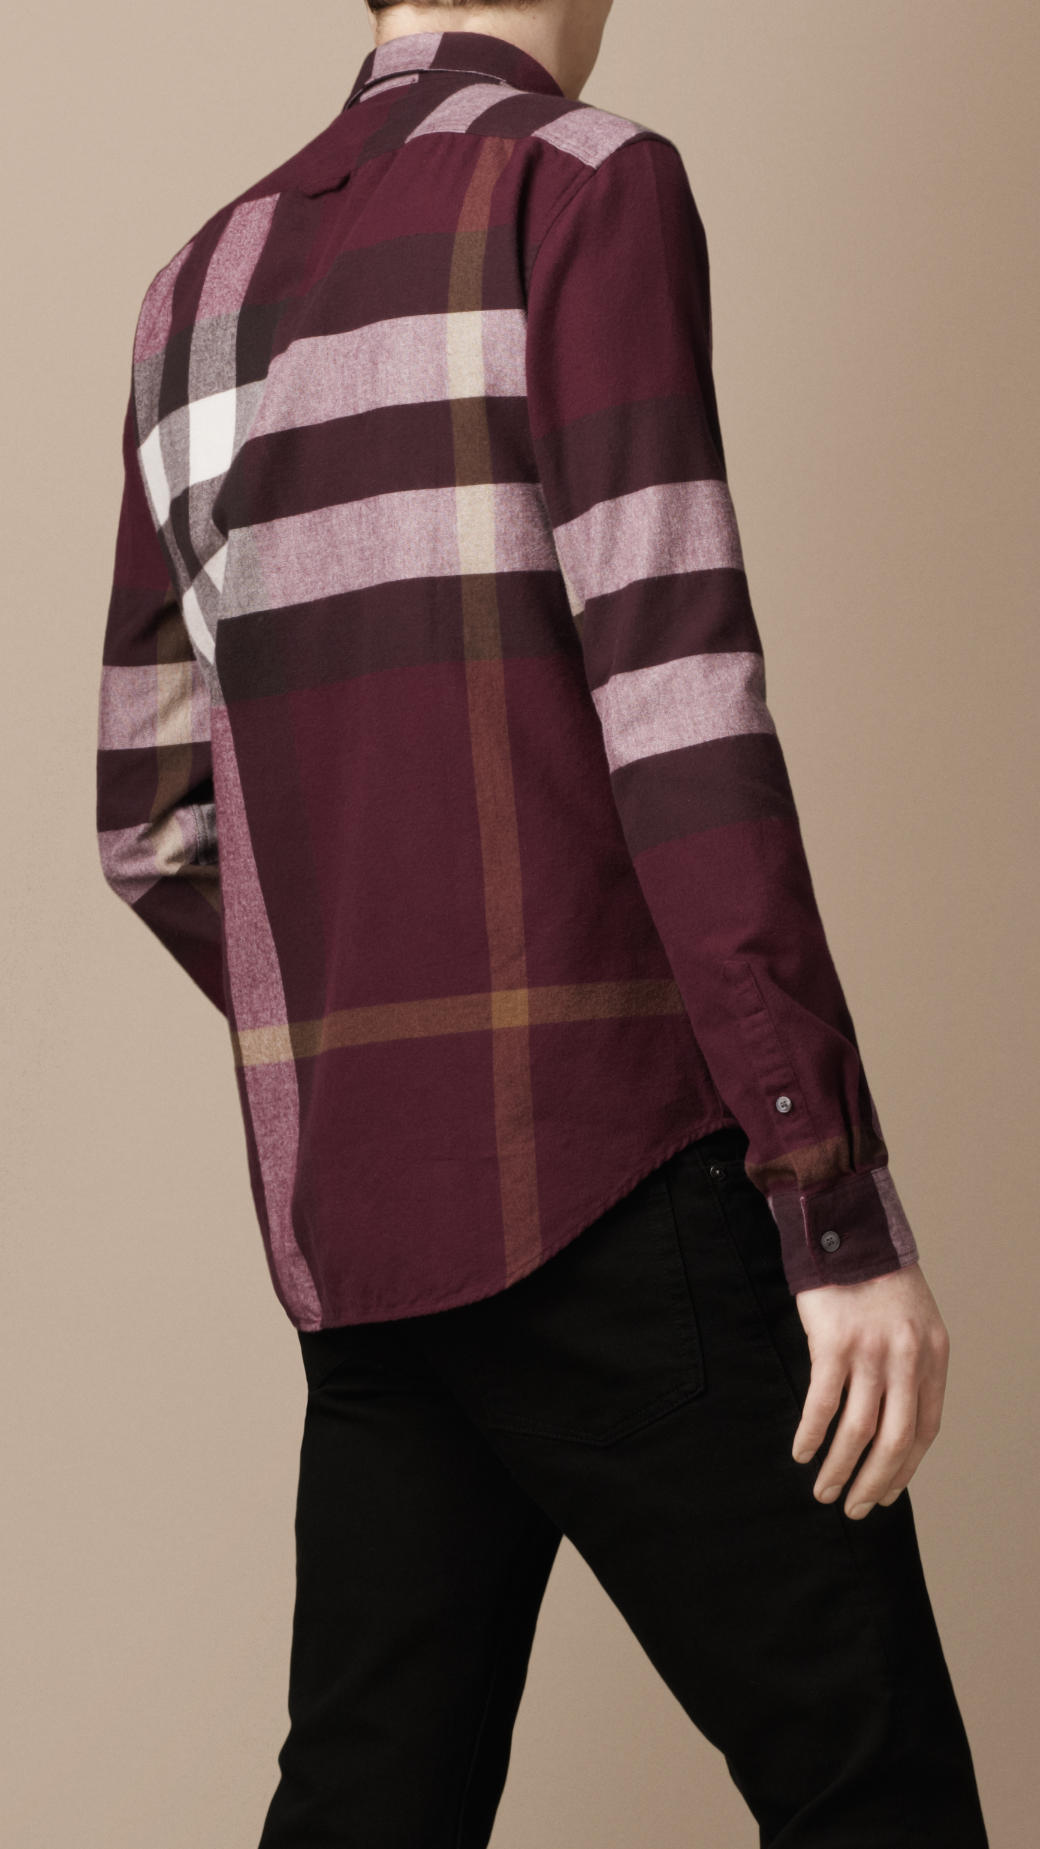 Burberry Brit Check Flannel Shirt in Red for Men - Lyst